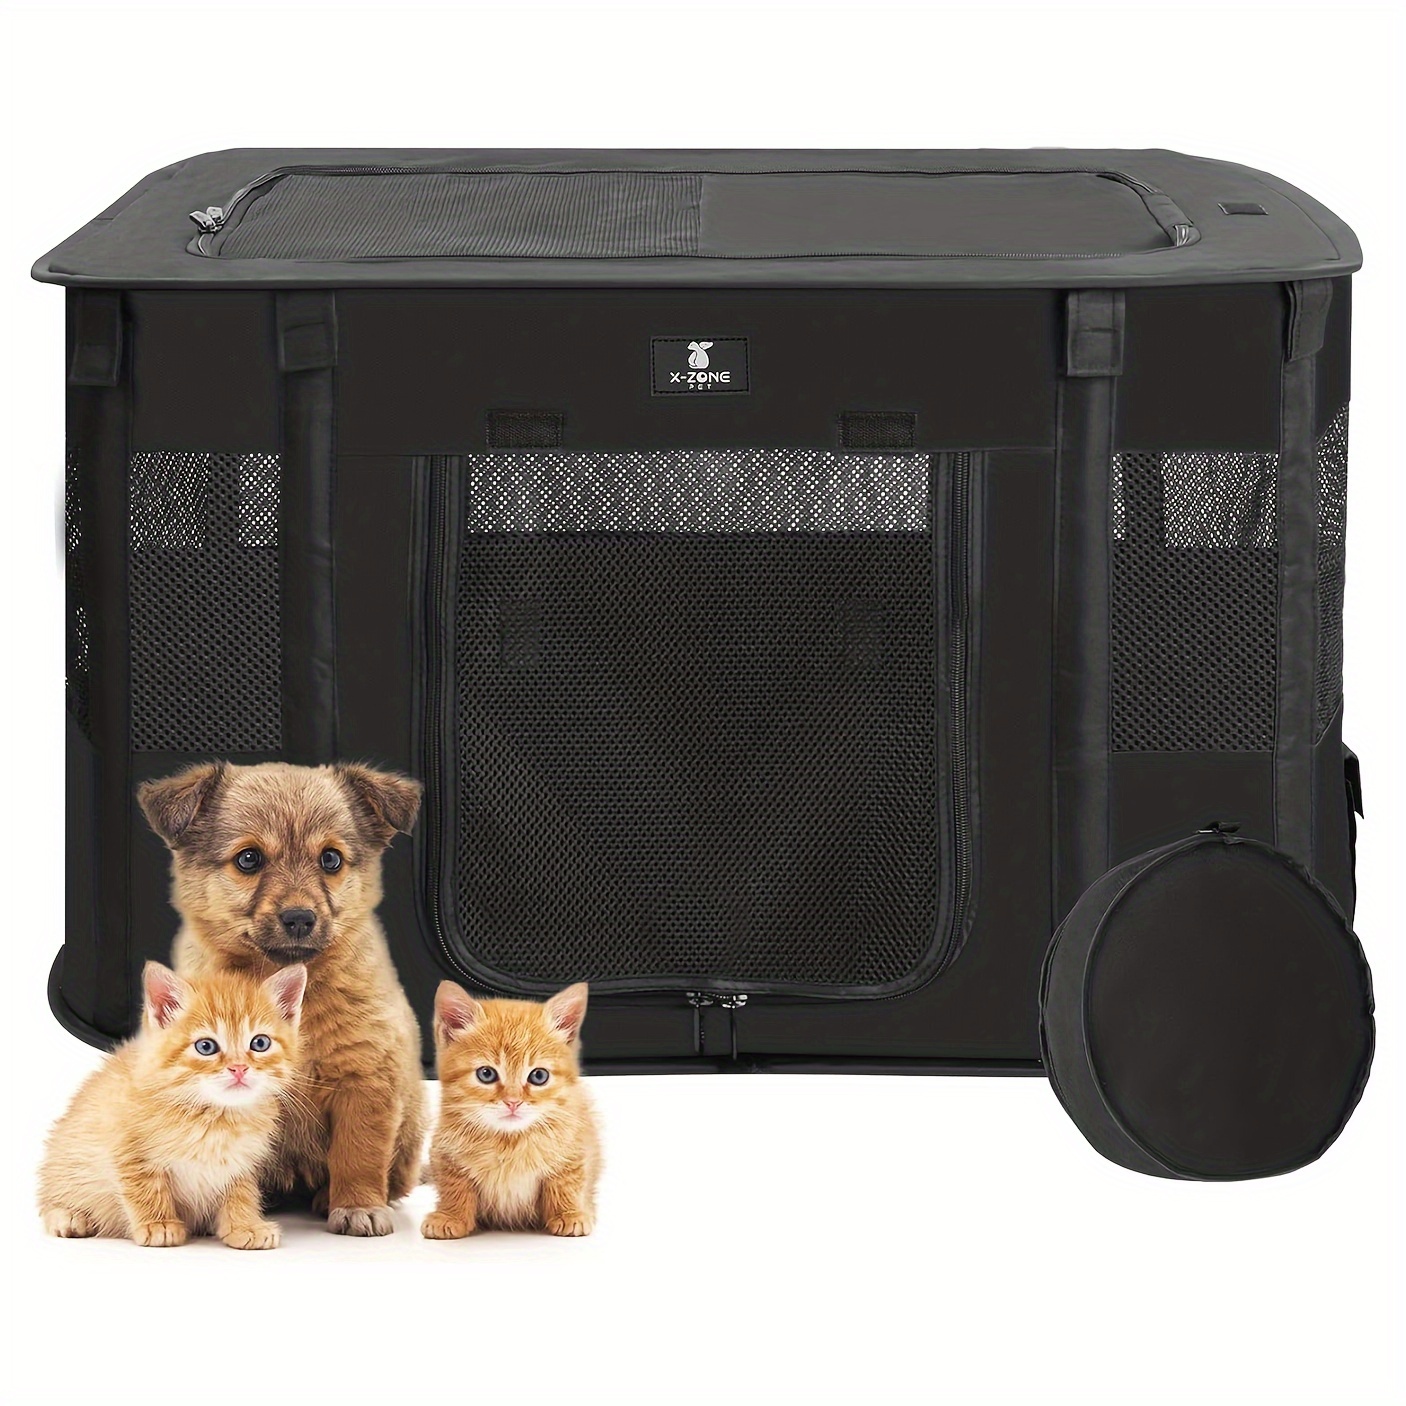 

Pet Dog Playpen, Portable Pen For Cat, Foldable Exercise Play Tent Kennel Crate, Great For Indoor Outdoor Travel Camping Use, Come With Free Carring Case